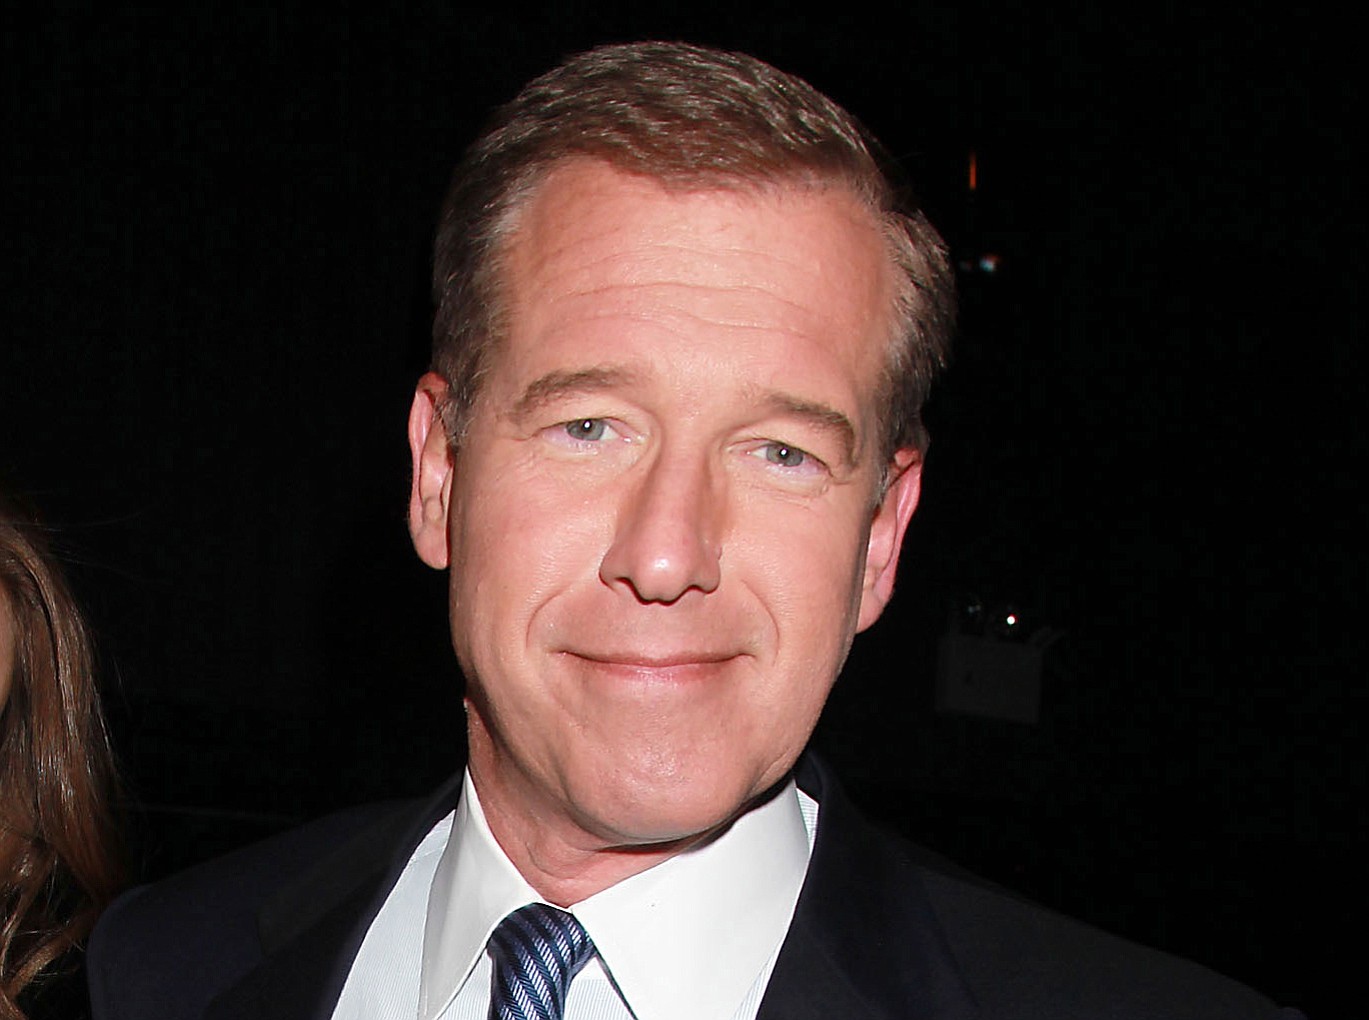 Brian Williams
NBC &quot;Nightly News&quot; anchor